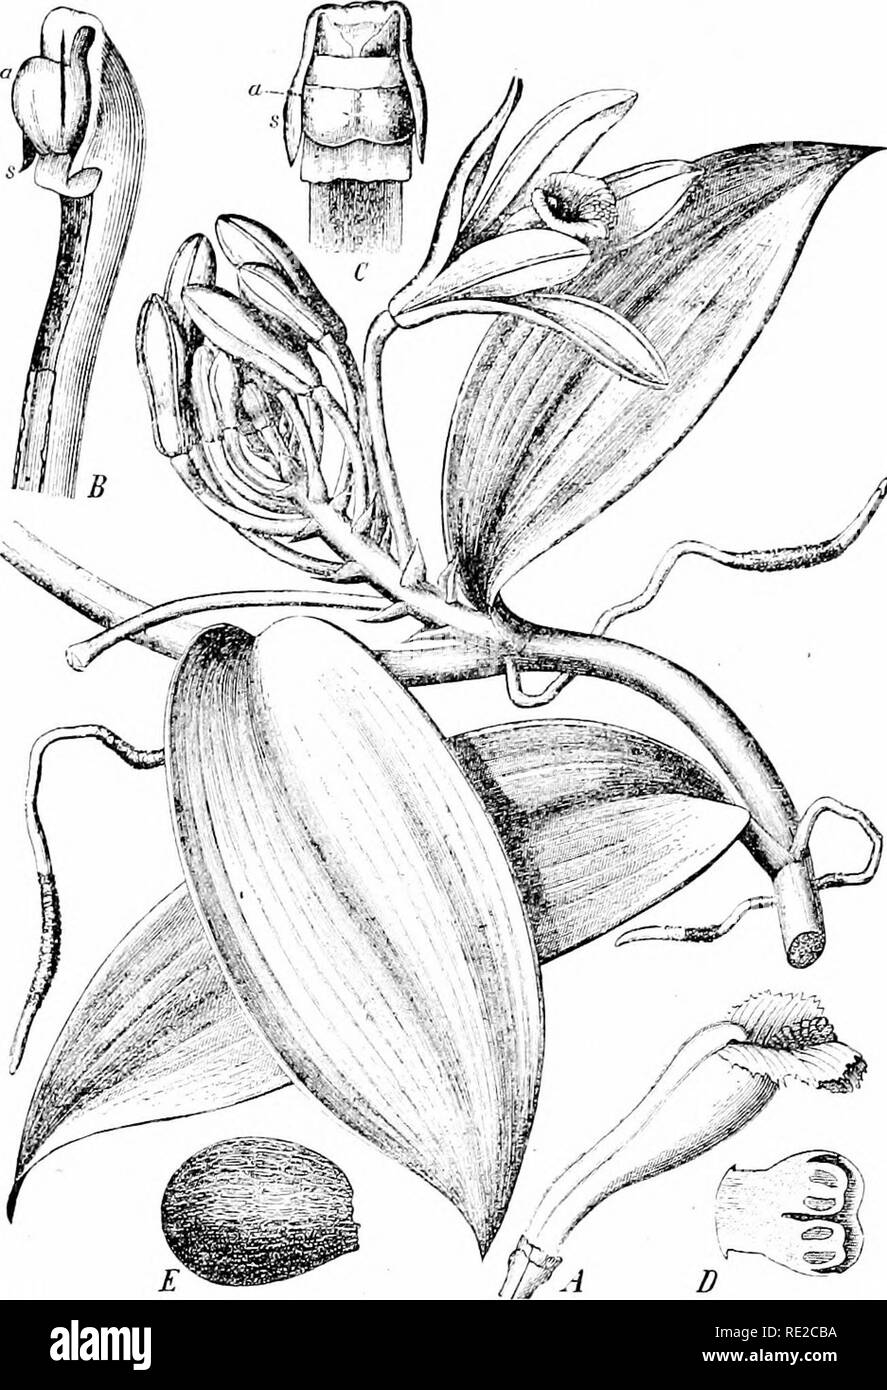 . Plants and their uses; an introduction to botany. Botany; Botany, Economic. ESSENCES 149. Fig. 148, I.—Vanilla (Vanilla planifolia, Orchid Family, Orchidacece.) Flowering branch, reducerj in size, showing leaves and air-roots. ^1, lip of the flower, and along its back the &quot;column&quot; formed of style and stamens grown together. B, C, column, ,side view and front view, show- ing anthers (a) and rudimentary .stamen (s). D, top of column, cut lengthwise through anthers. E, seed, much enlarged. (Berg and Schmidt.) A tall, climbing herb attaching itself to trees by means of air-roots; leave Stock Photo